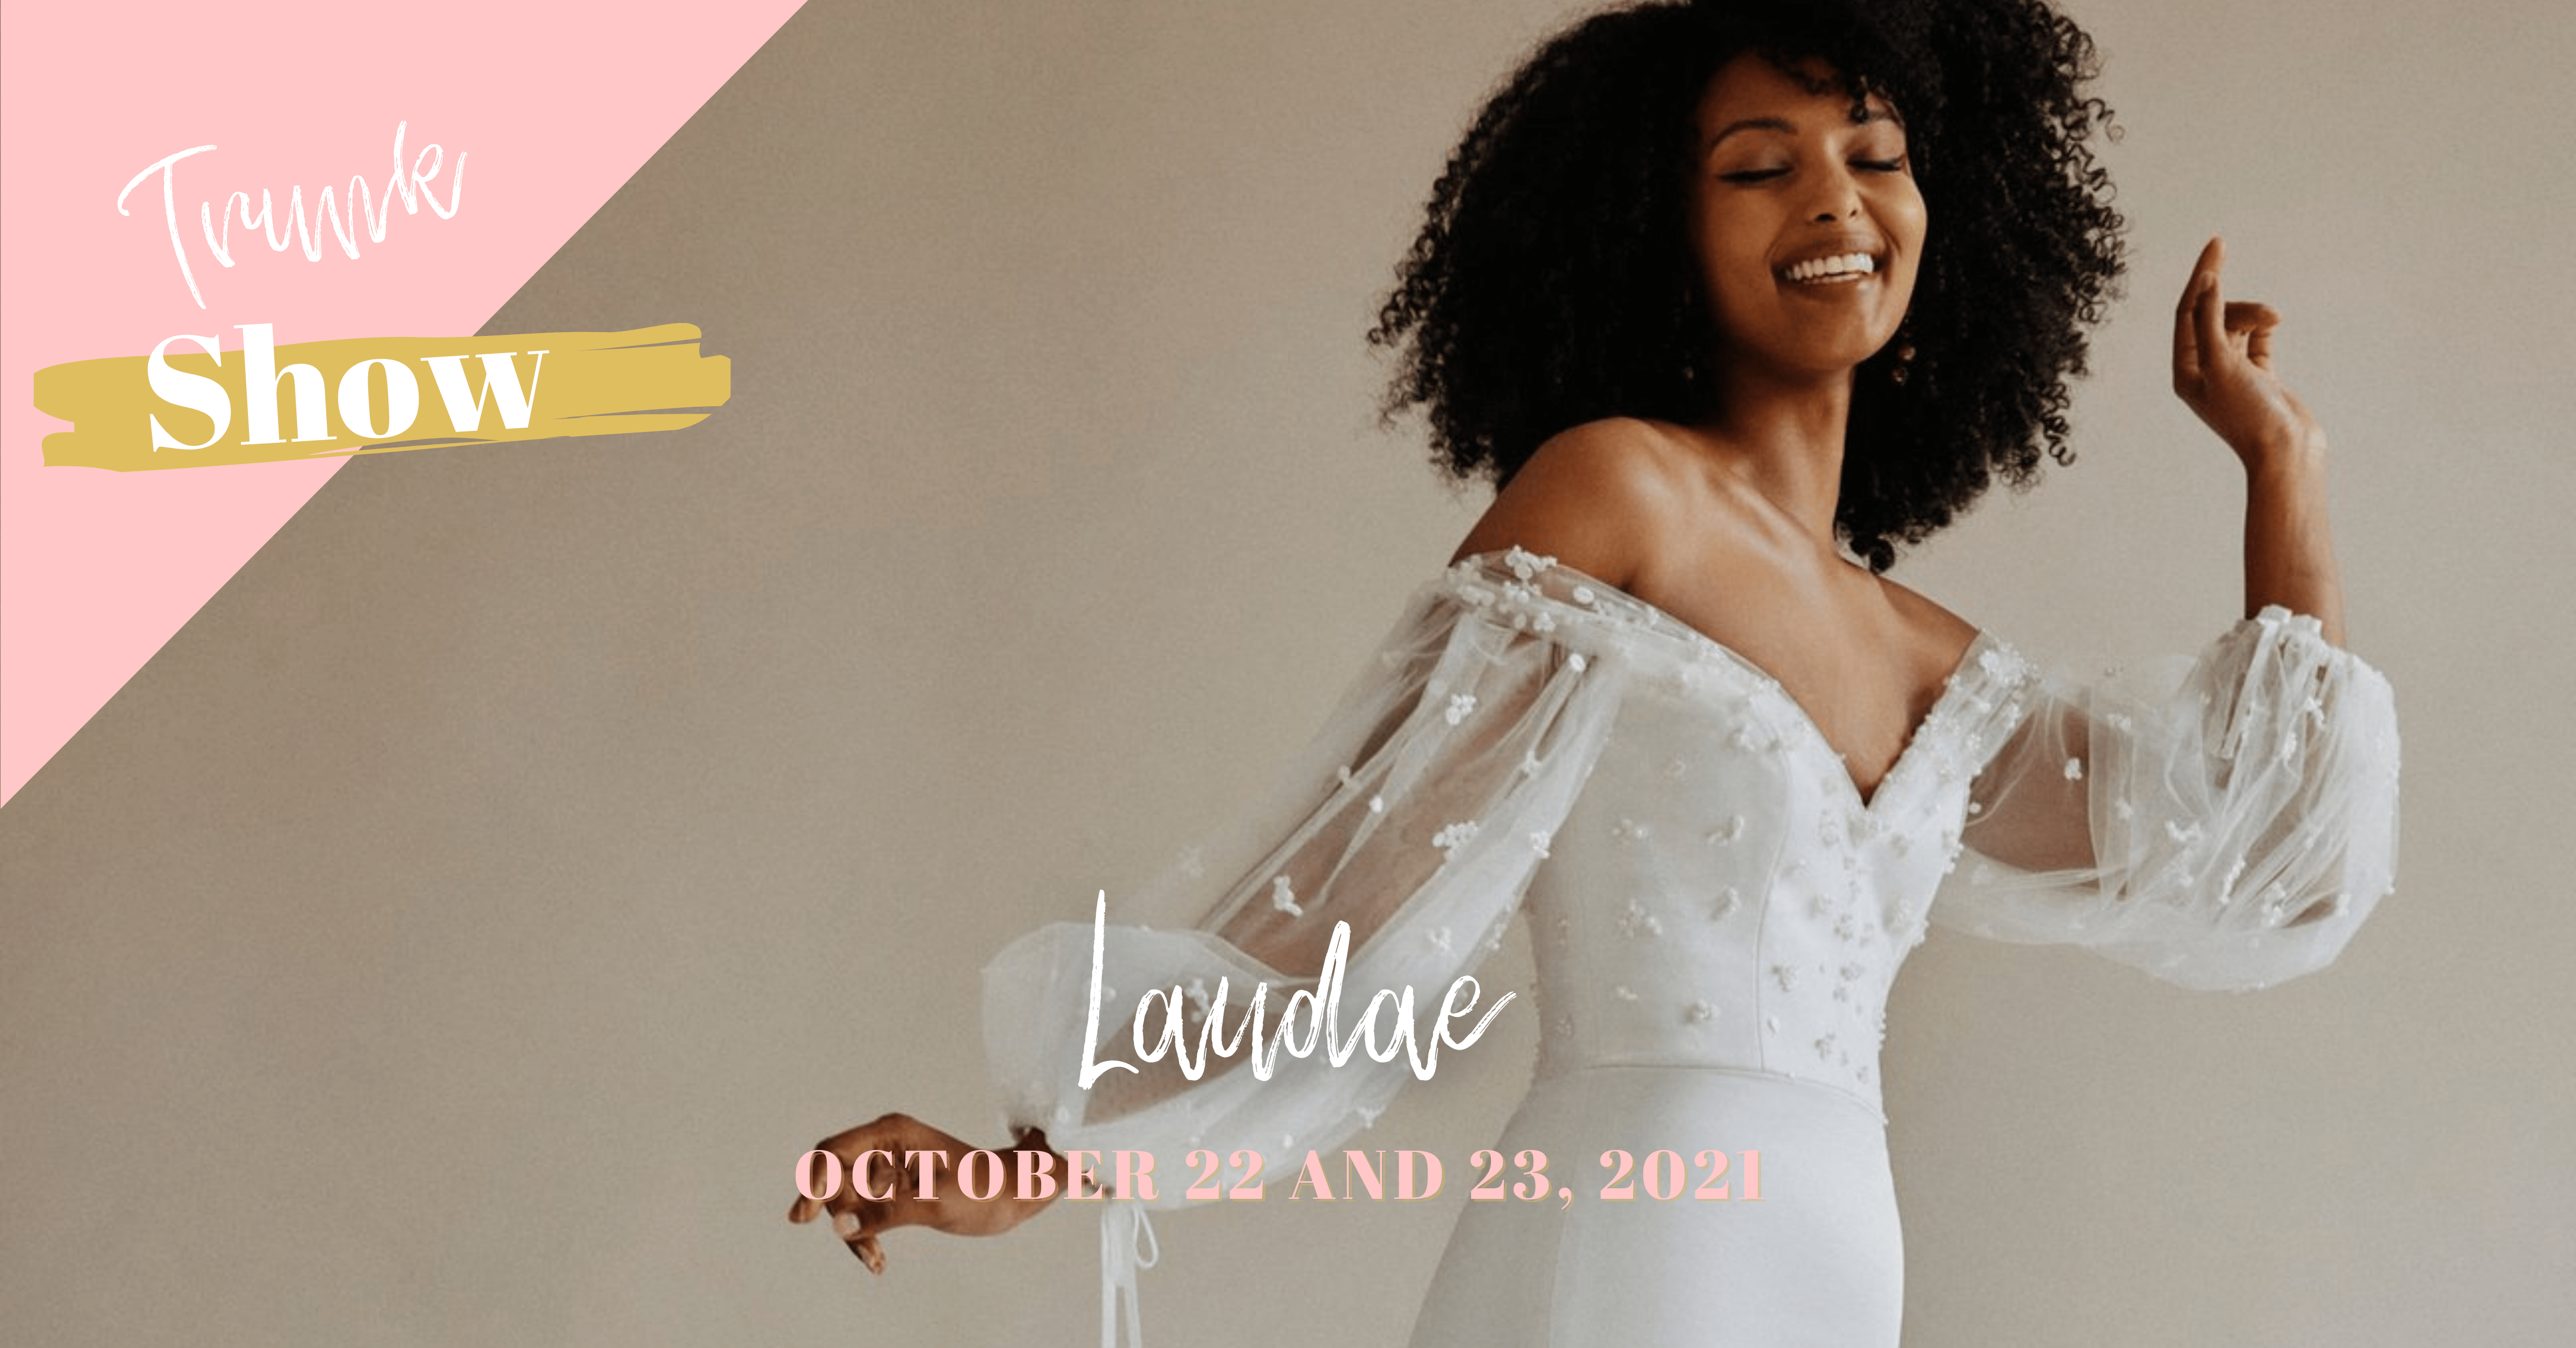 Laudae on October 22 and 23, 2021